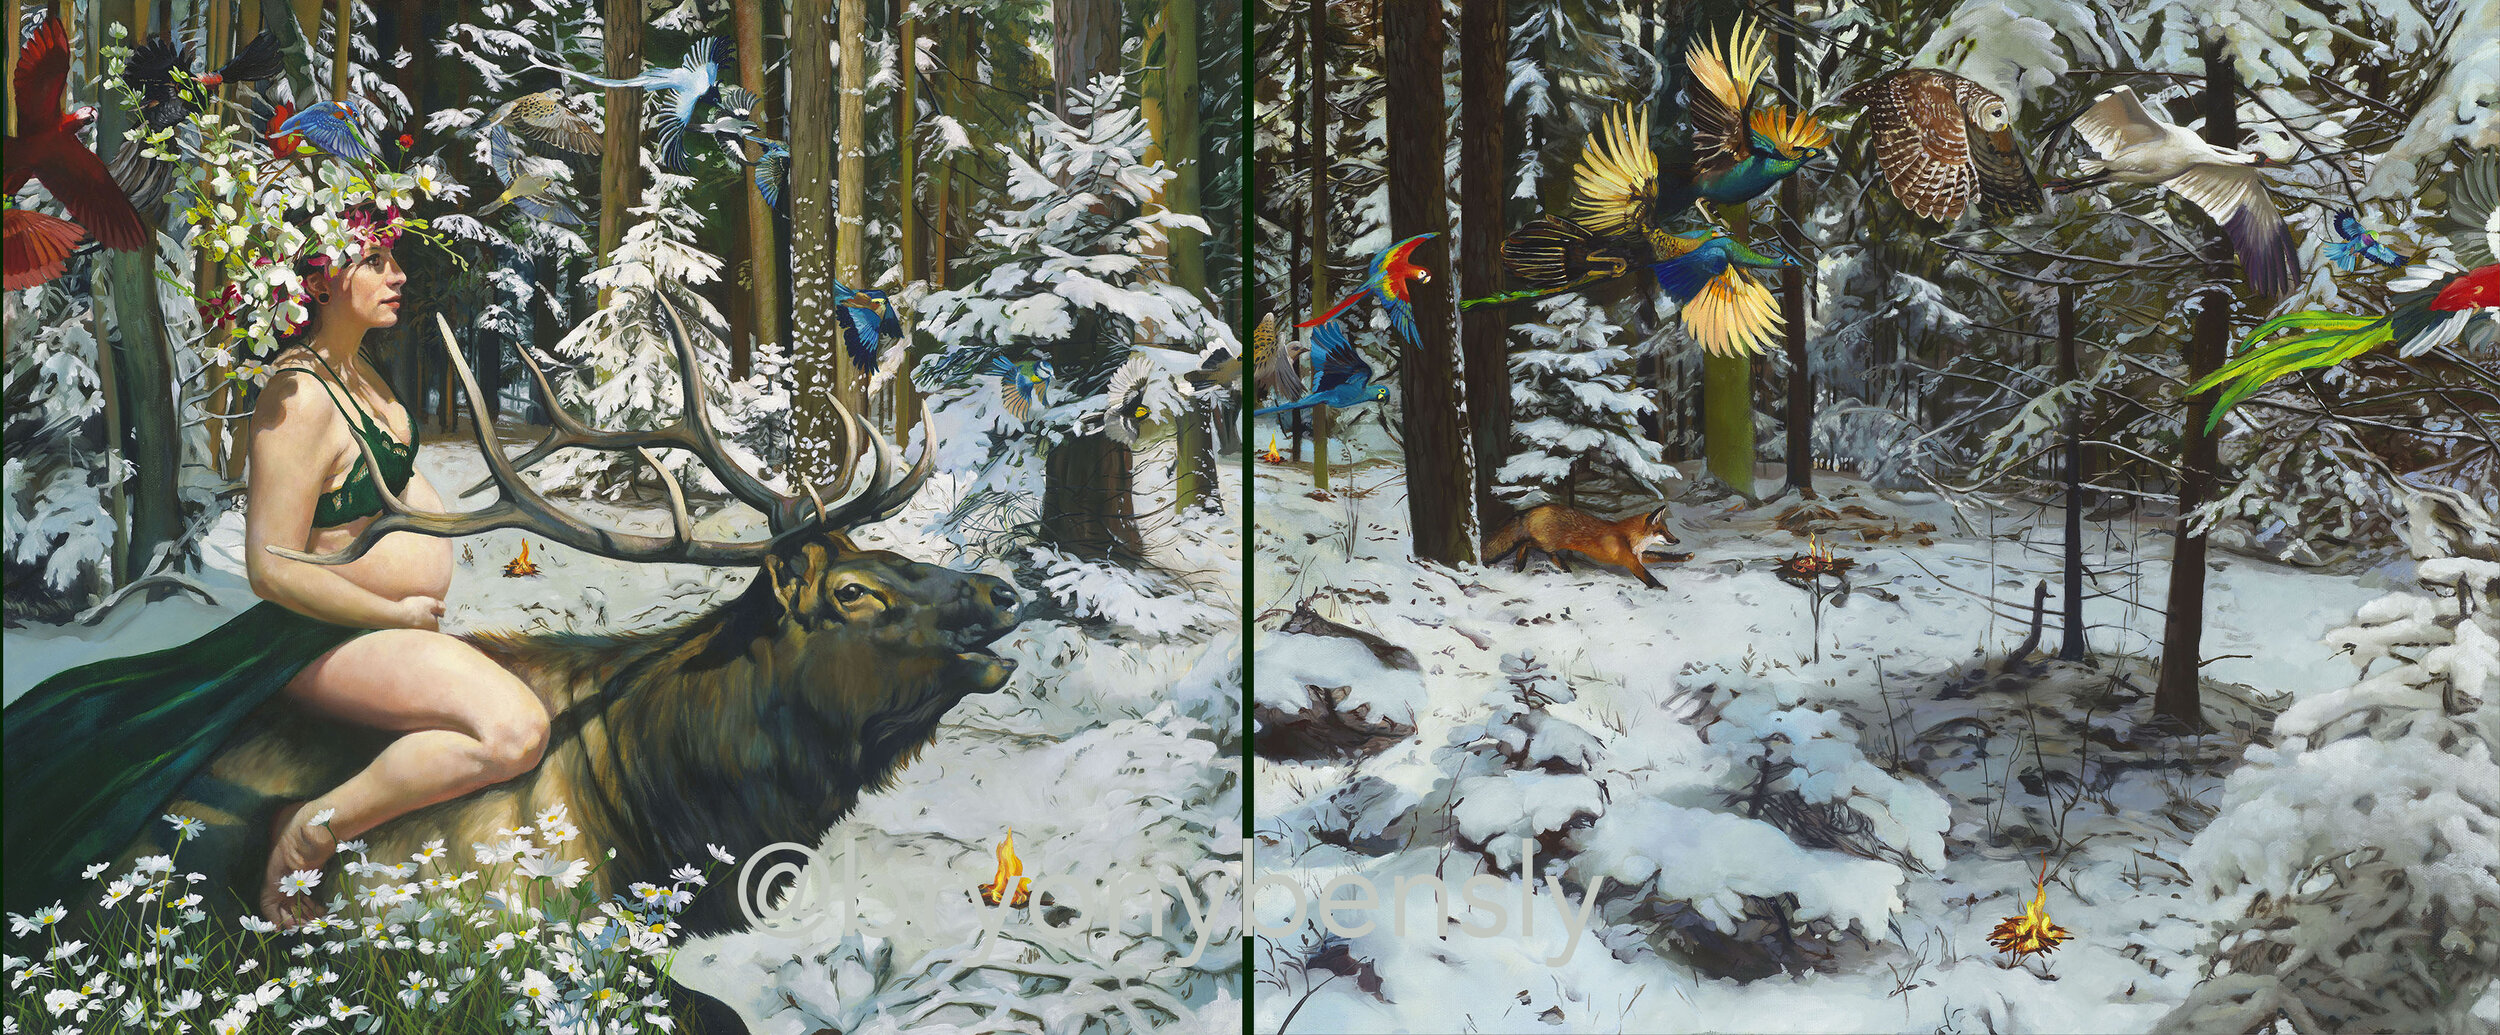 Rebirth, diptych, oil on canvas, total length: 20 x 48 inches